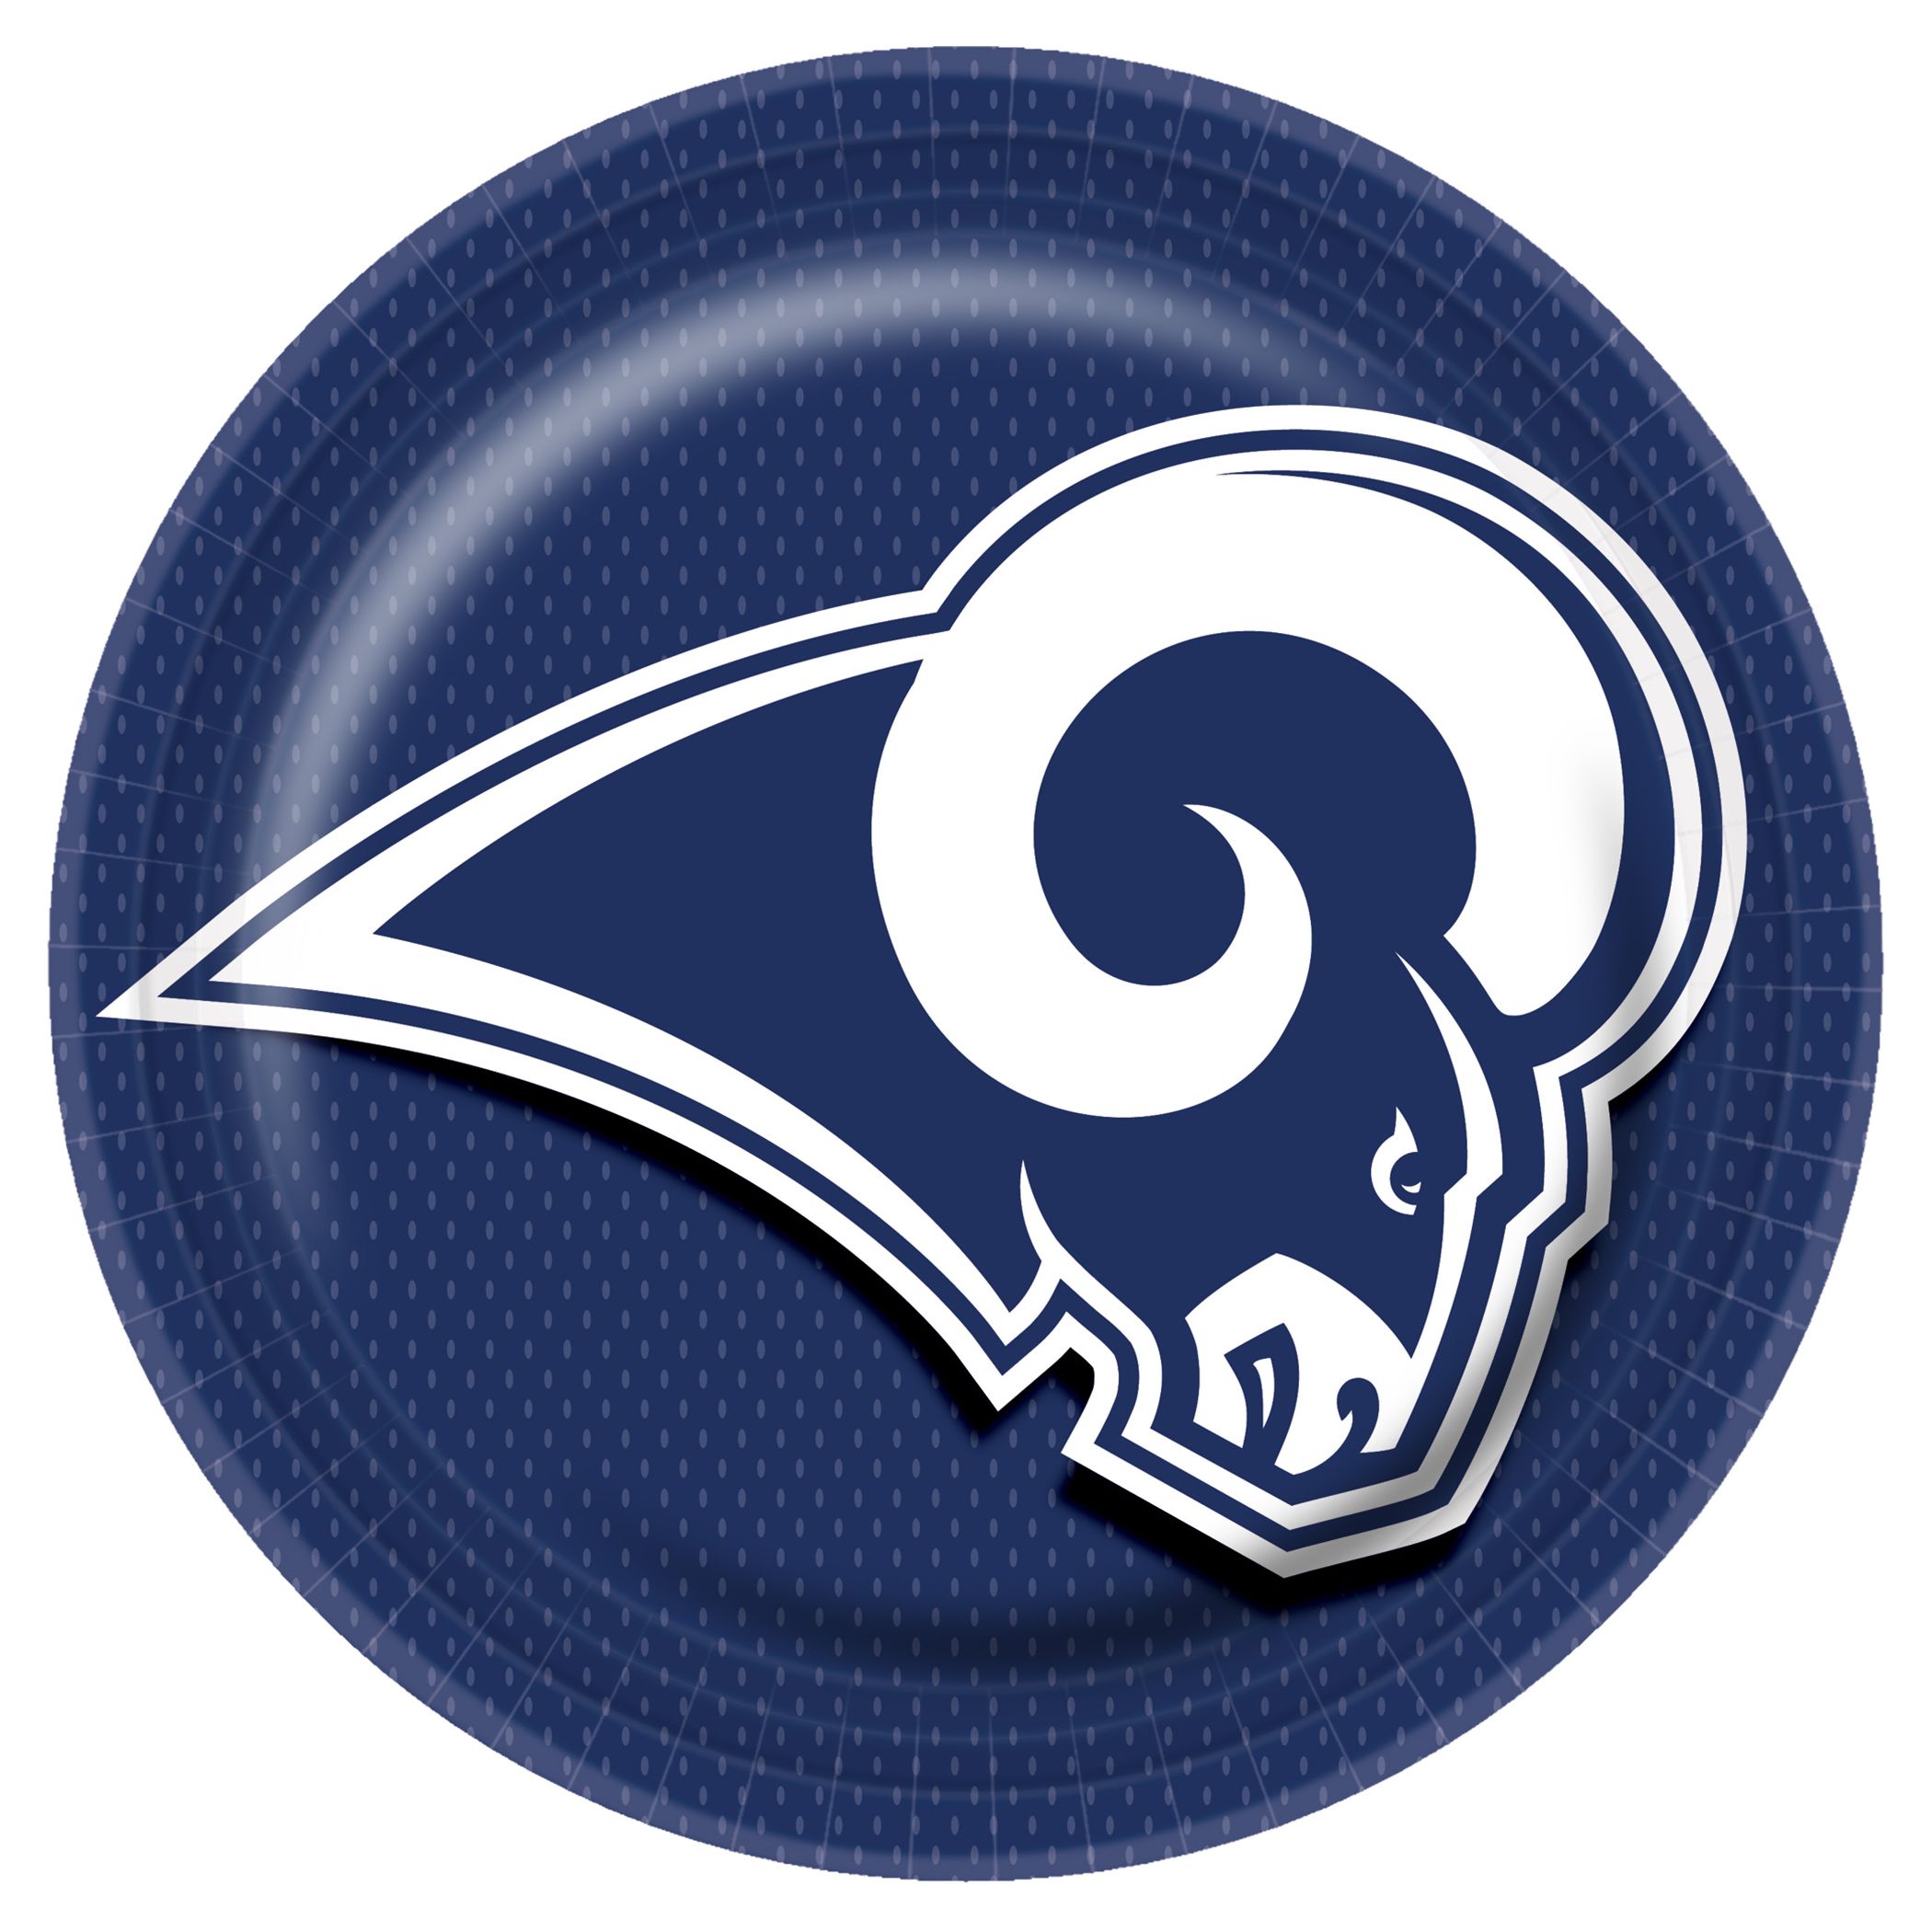 Veil Entertainment Los Angeles Rams Football Decoration 66pc Party Pack, Navy Blue White Gold